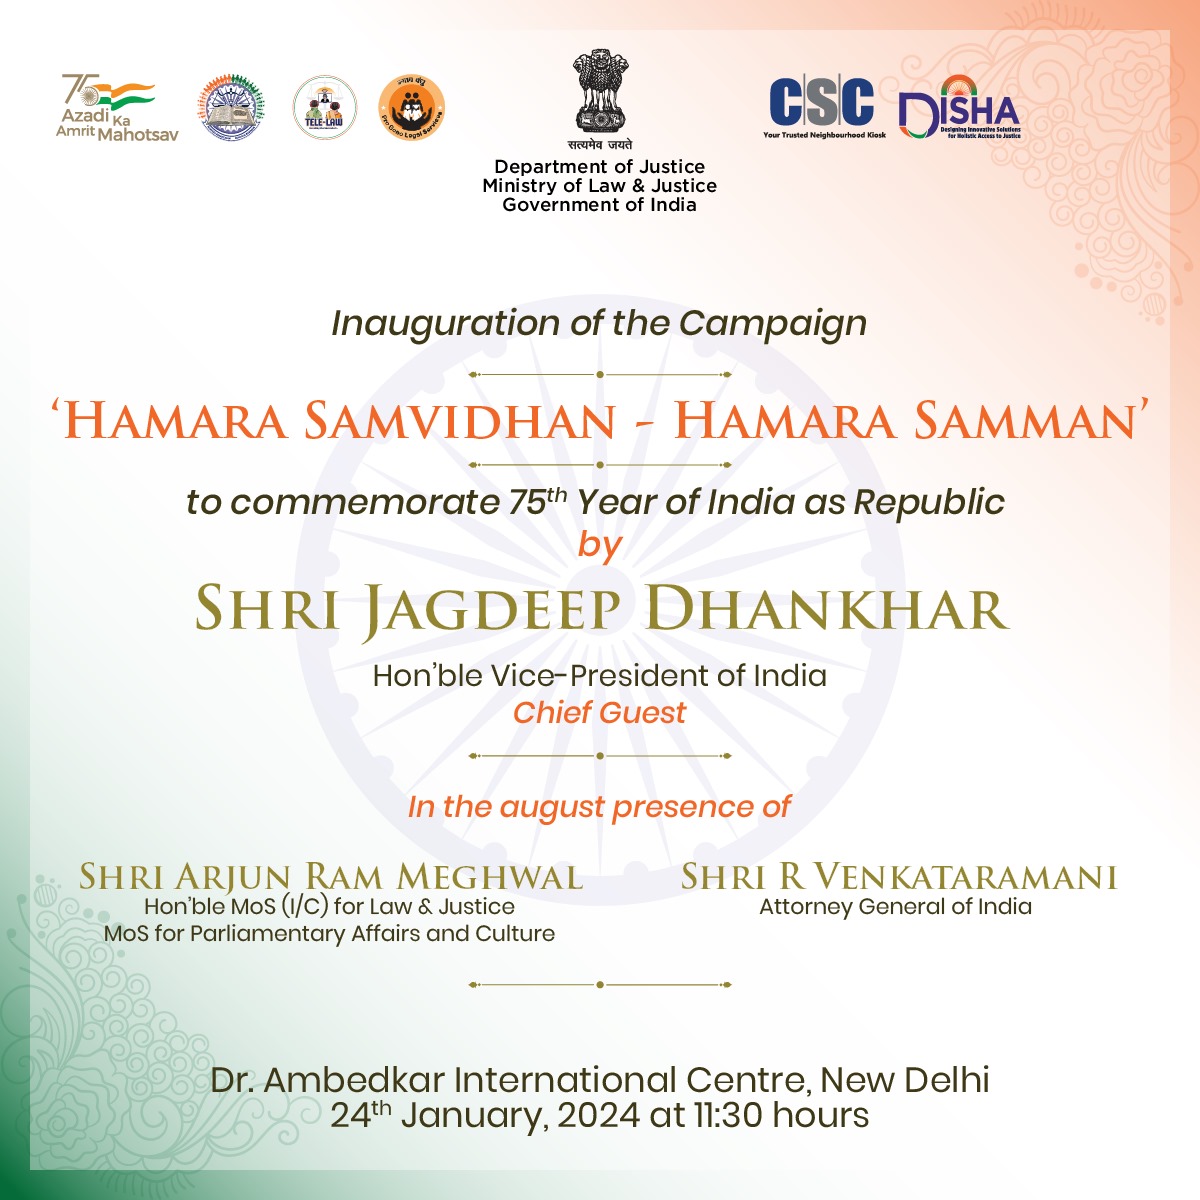 Inauguration of the Campaign 'HAMARA SAMVIDHAN - HAMARA SAMMAN' to commemorate the 75th Year of India as a Republic by SHRI JAGDEEP DHANKHAR, Hon'ble Vice-President of India. Join us LIVE on the CSC X (Twitter) Page on 24th January, 2024 (Wednesday) from 11:30 AM onwards.